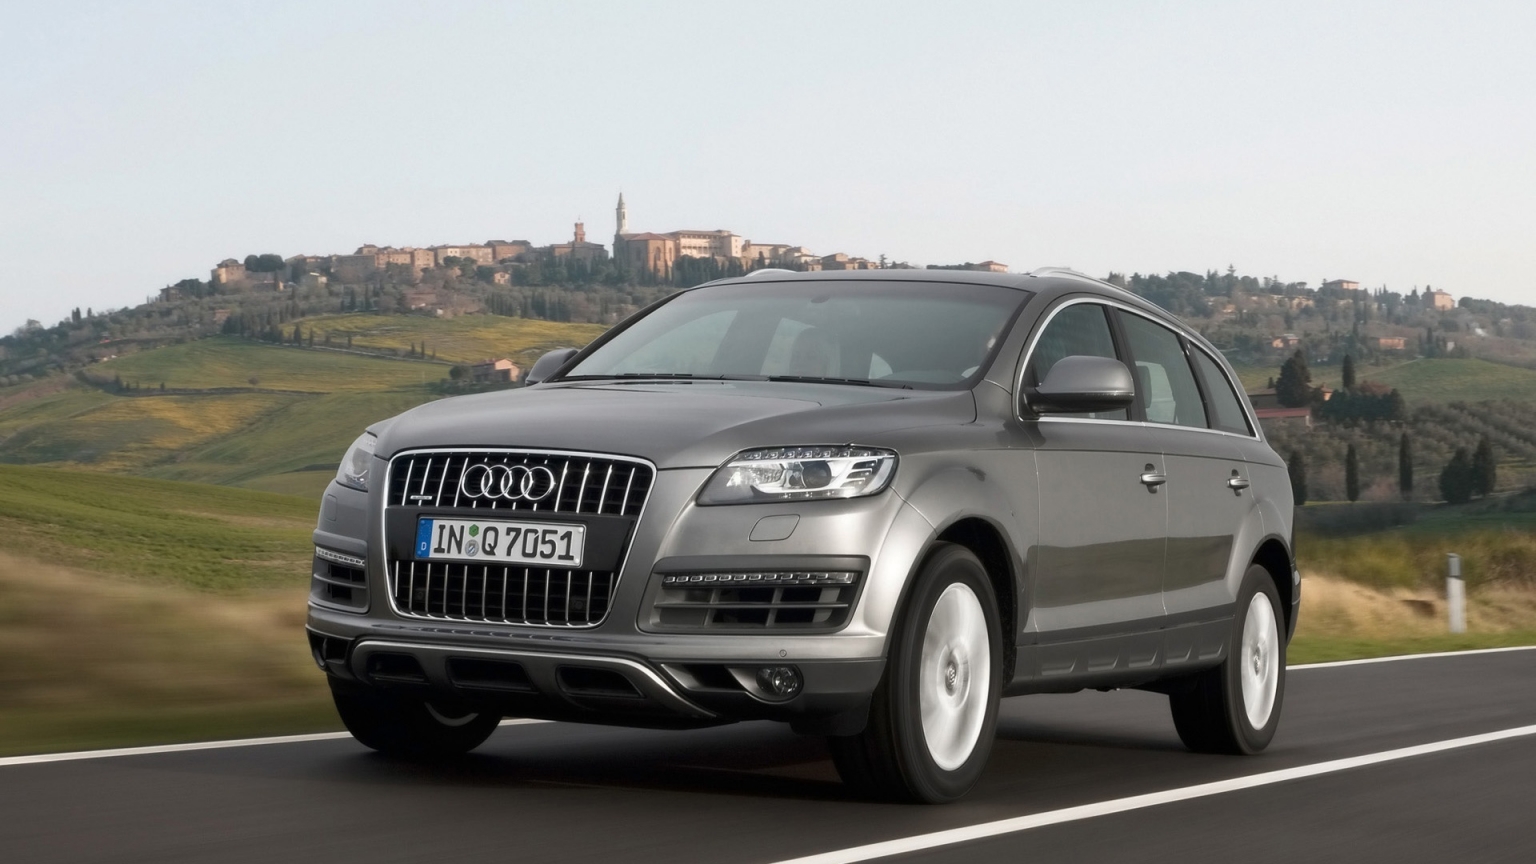 2009 Audi Q7 - Grey Front Angle Speed 1 for 1536 x 864 HDTV resolution